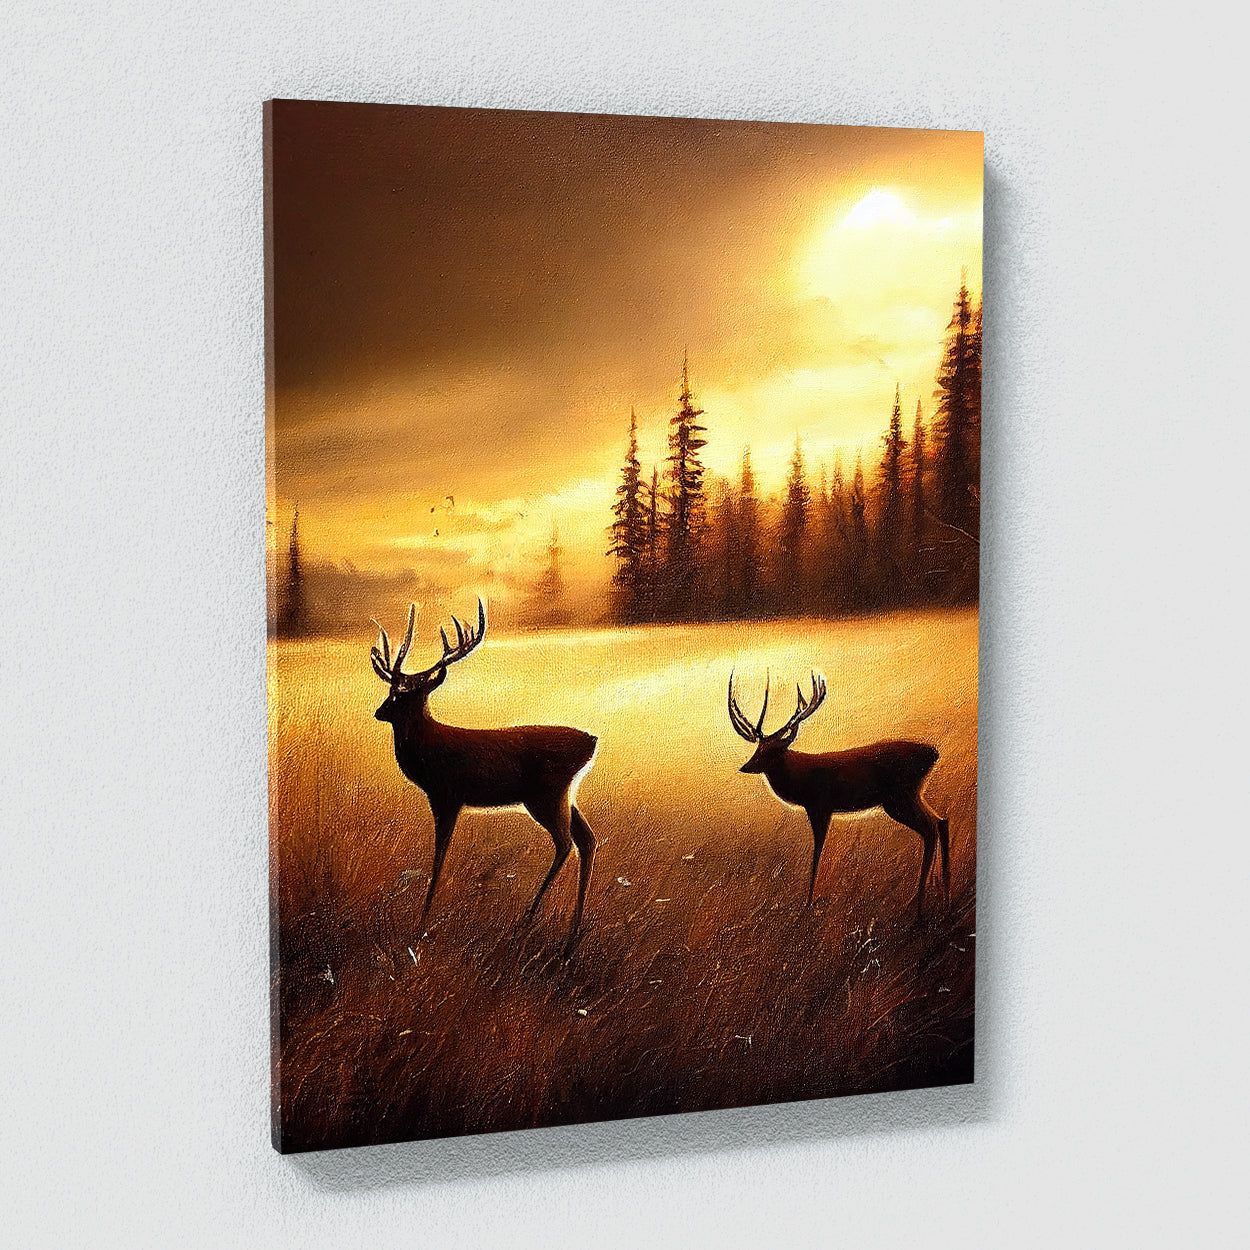 Deer 18 Canvas Wall Art Print Decor Artwork Picture Painting